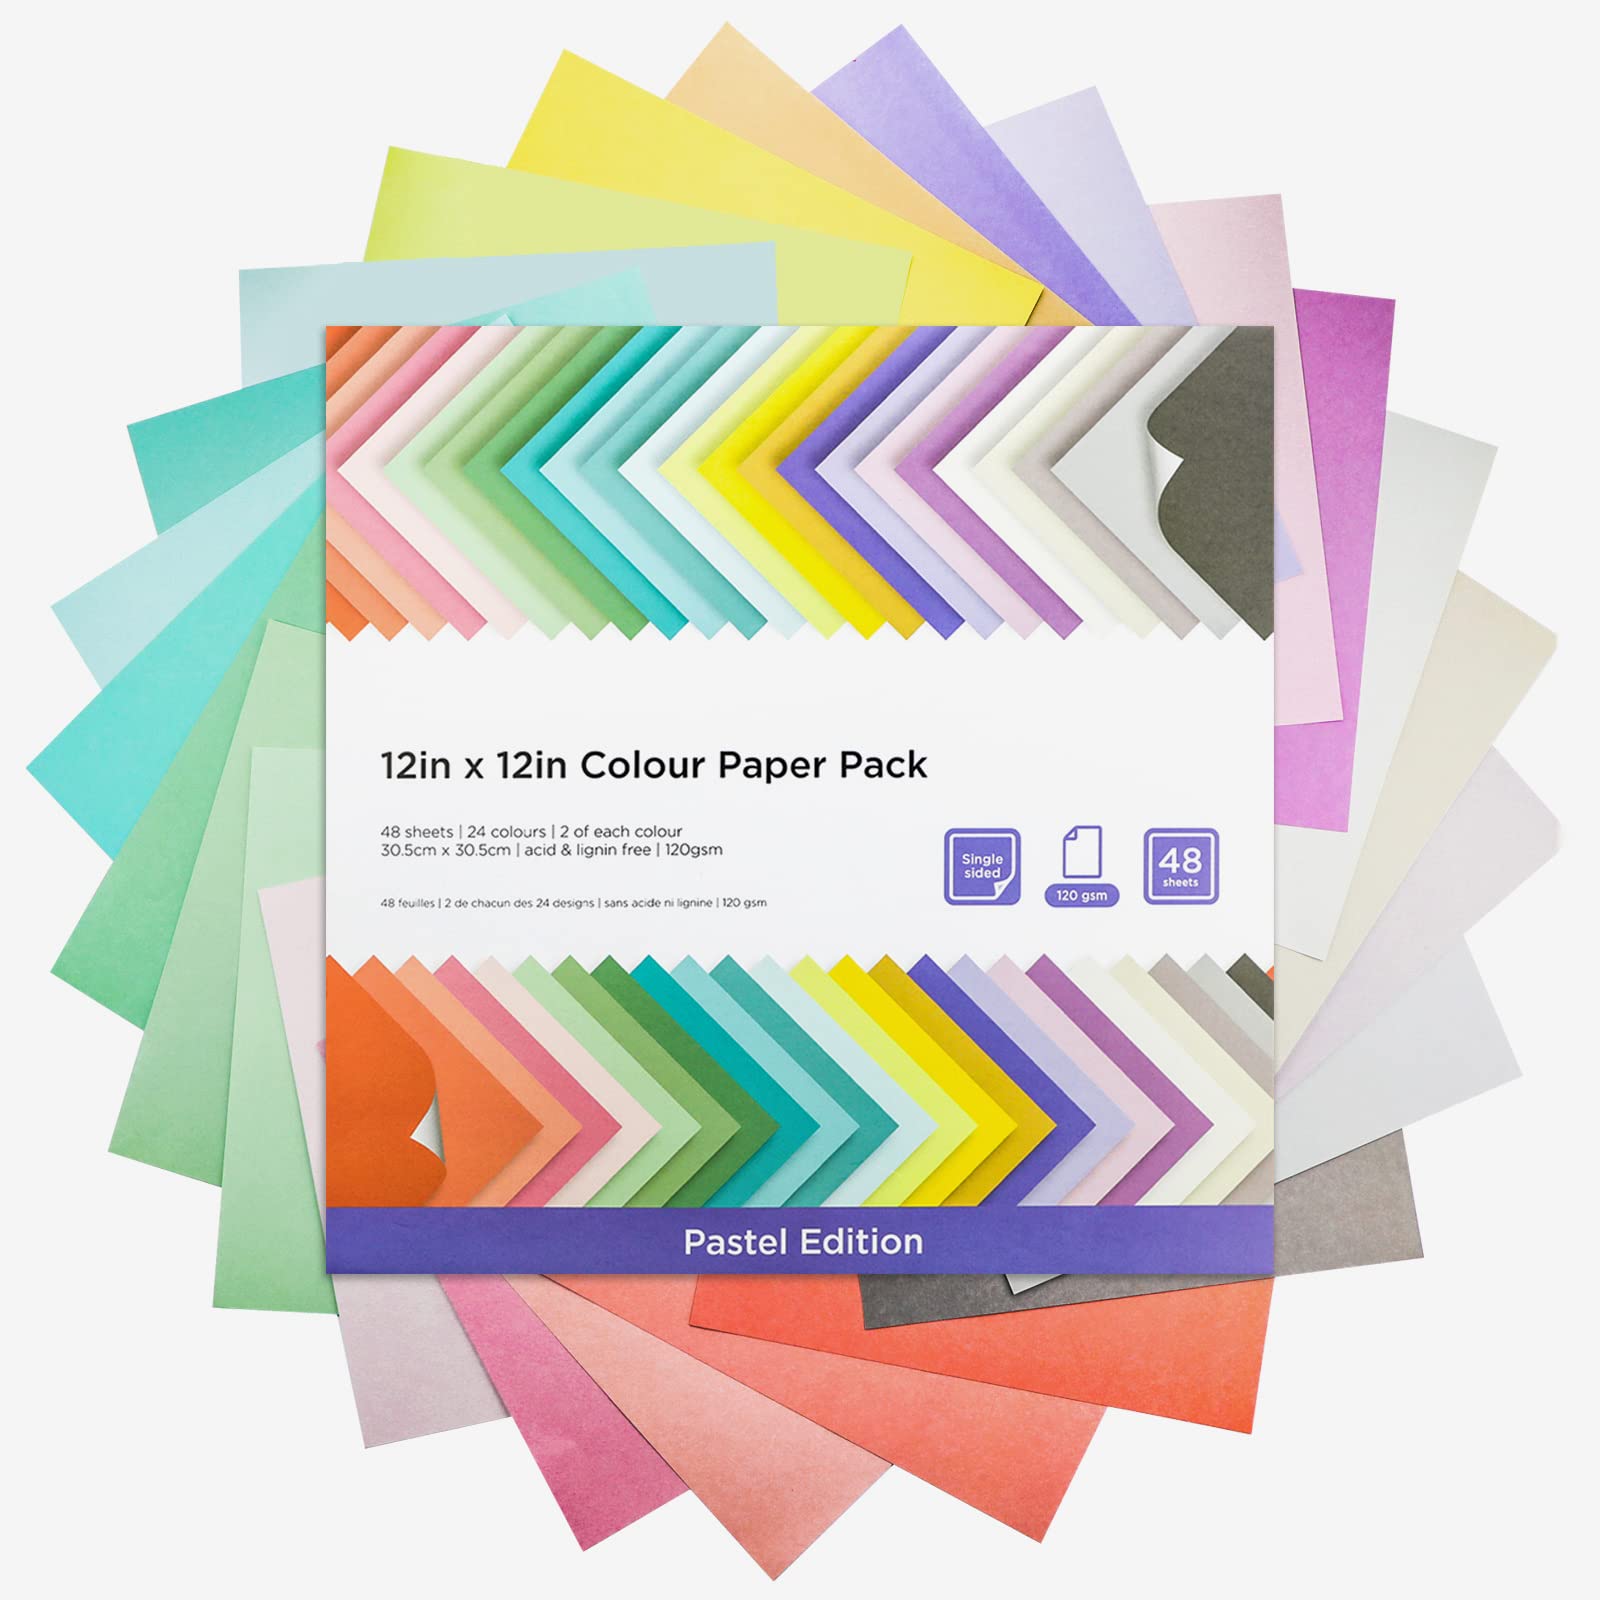 12 Sheets Rainbow Series Material Paper Pack, Beautiful Colored Paper  Cards, Scrapbook, Card Making, Background Paper